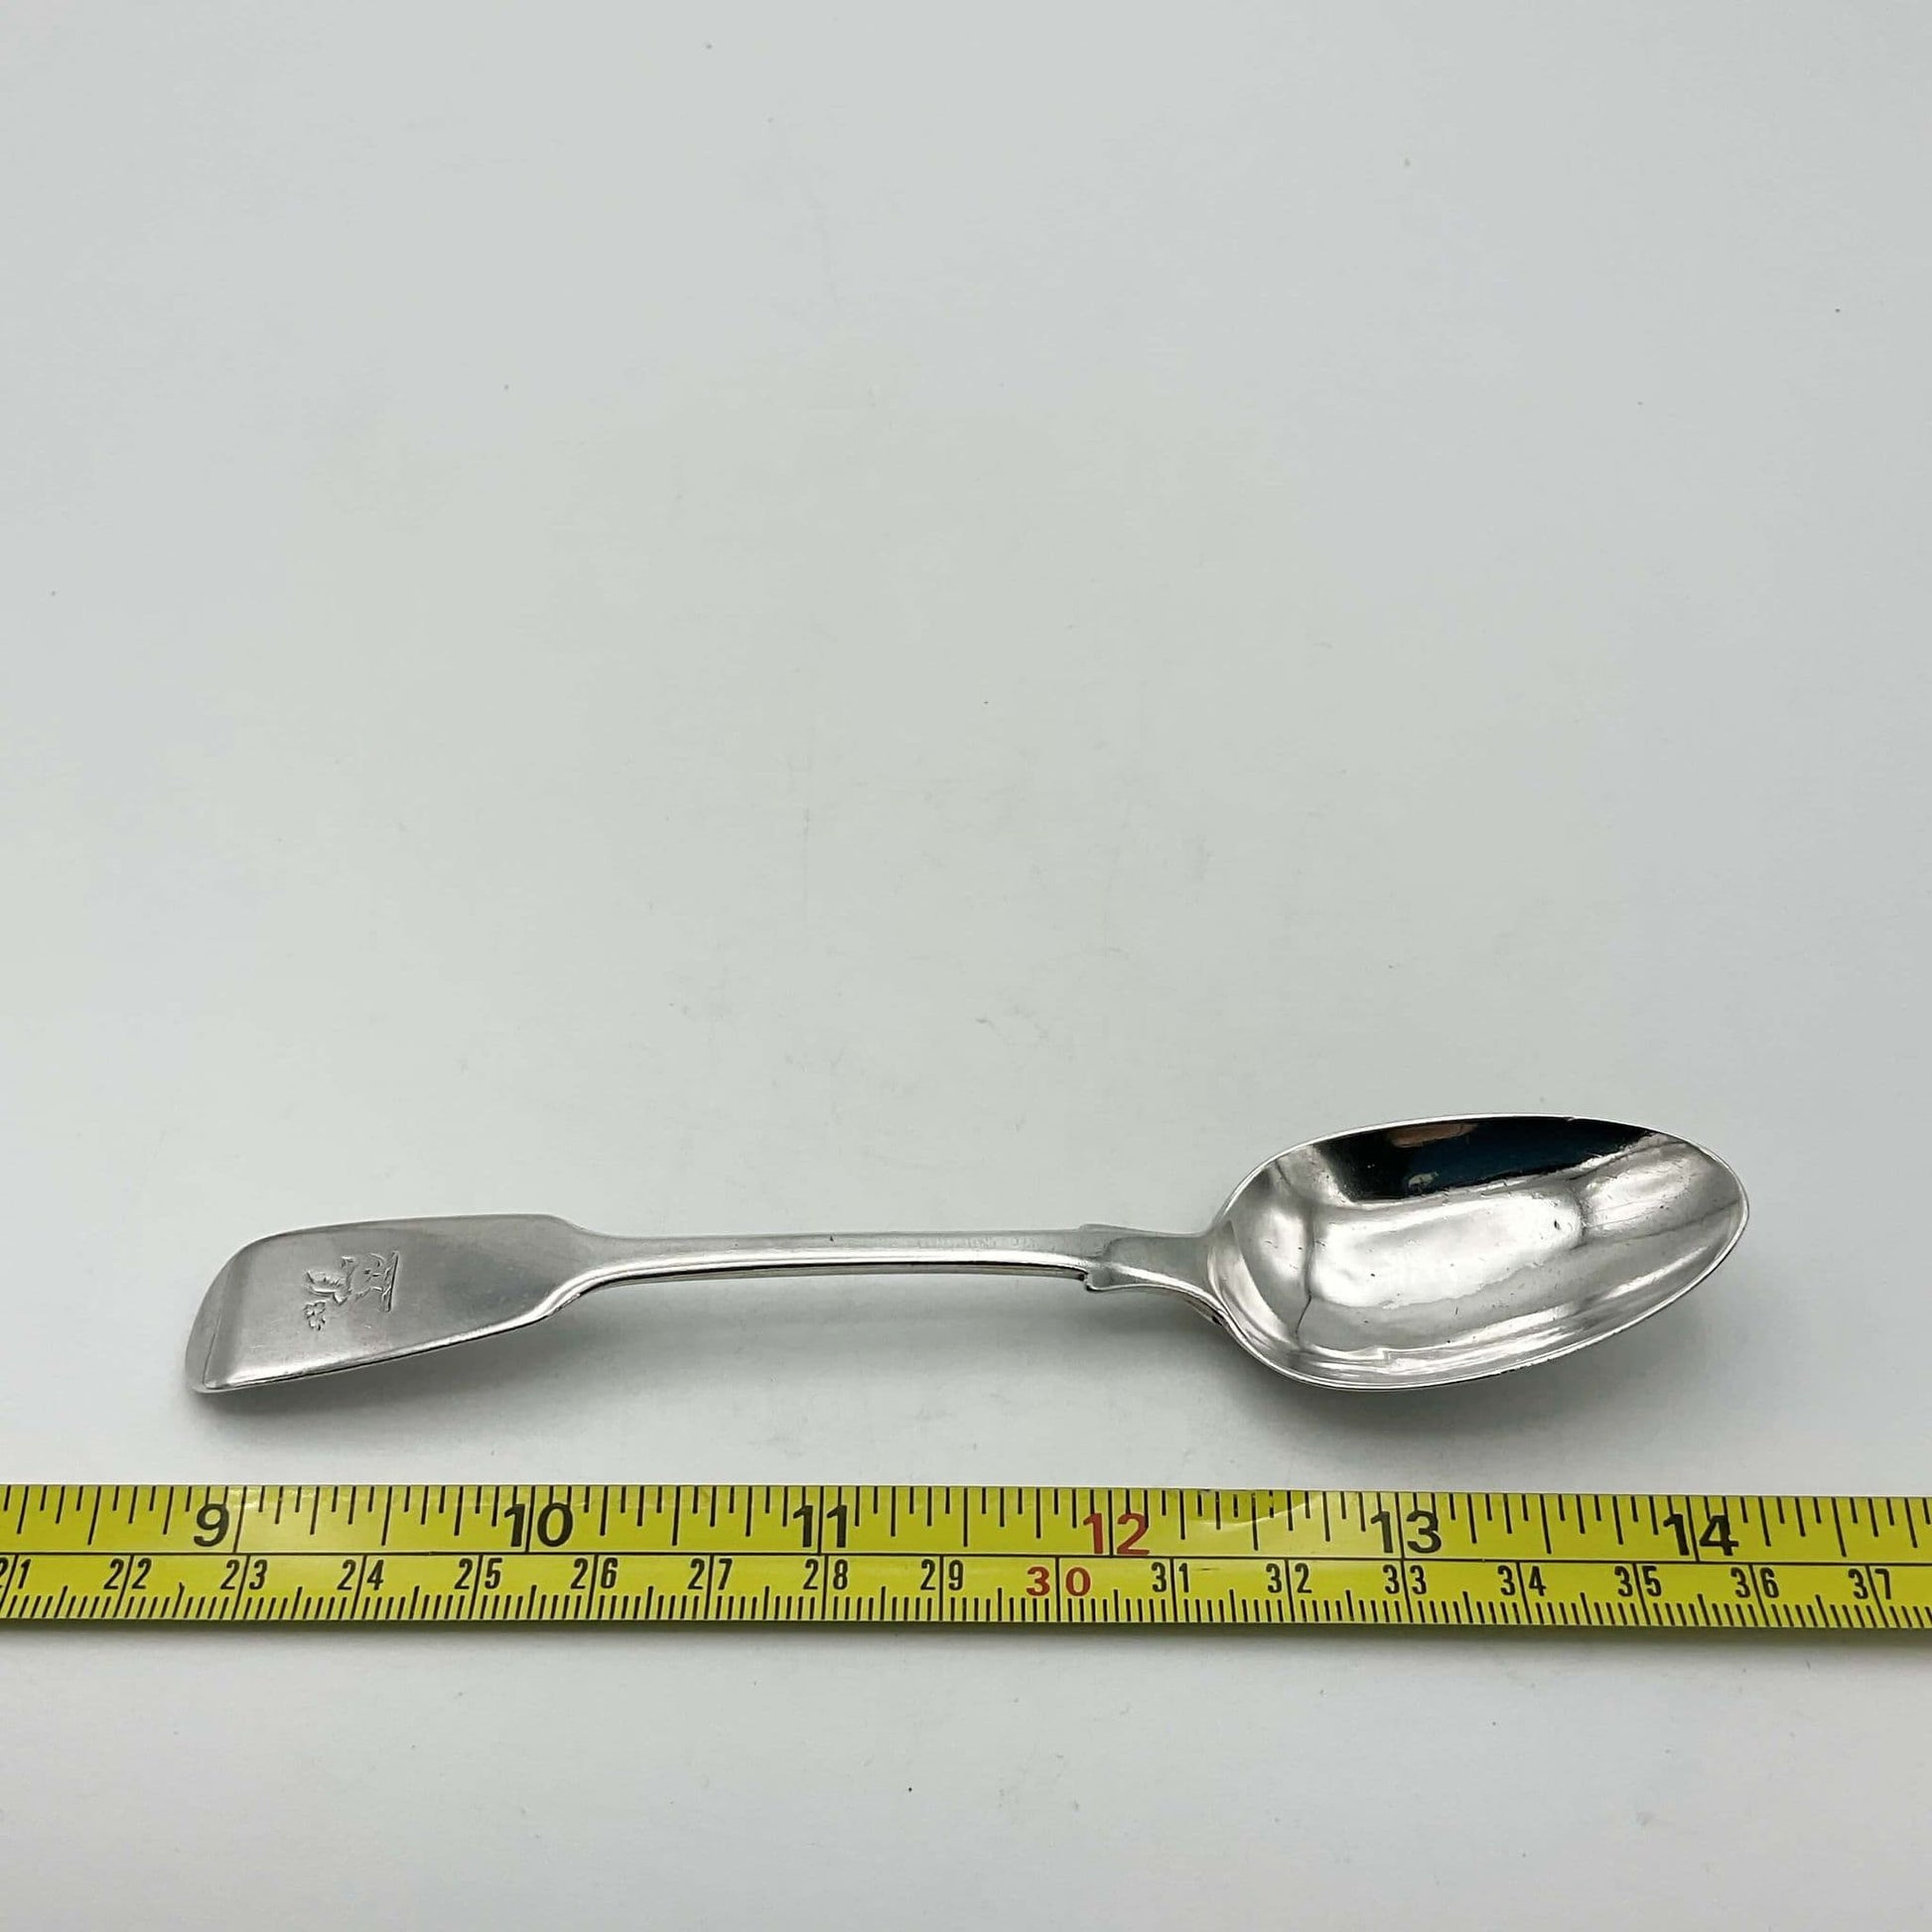 Antique silver teaspoon next to a tape measure showing it’s length as 14cm